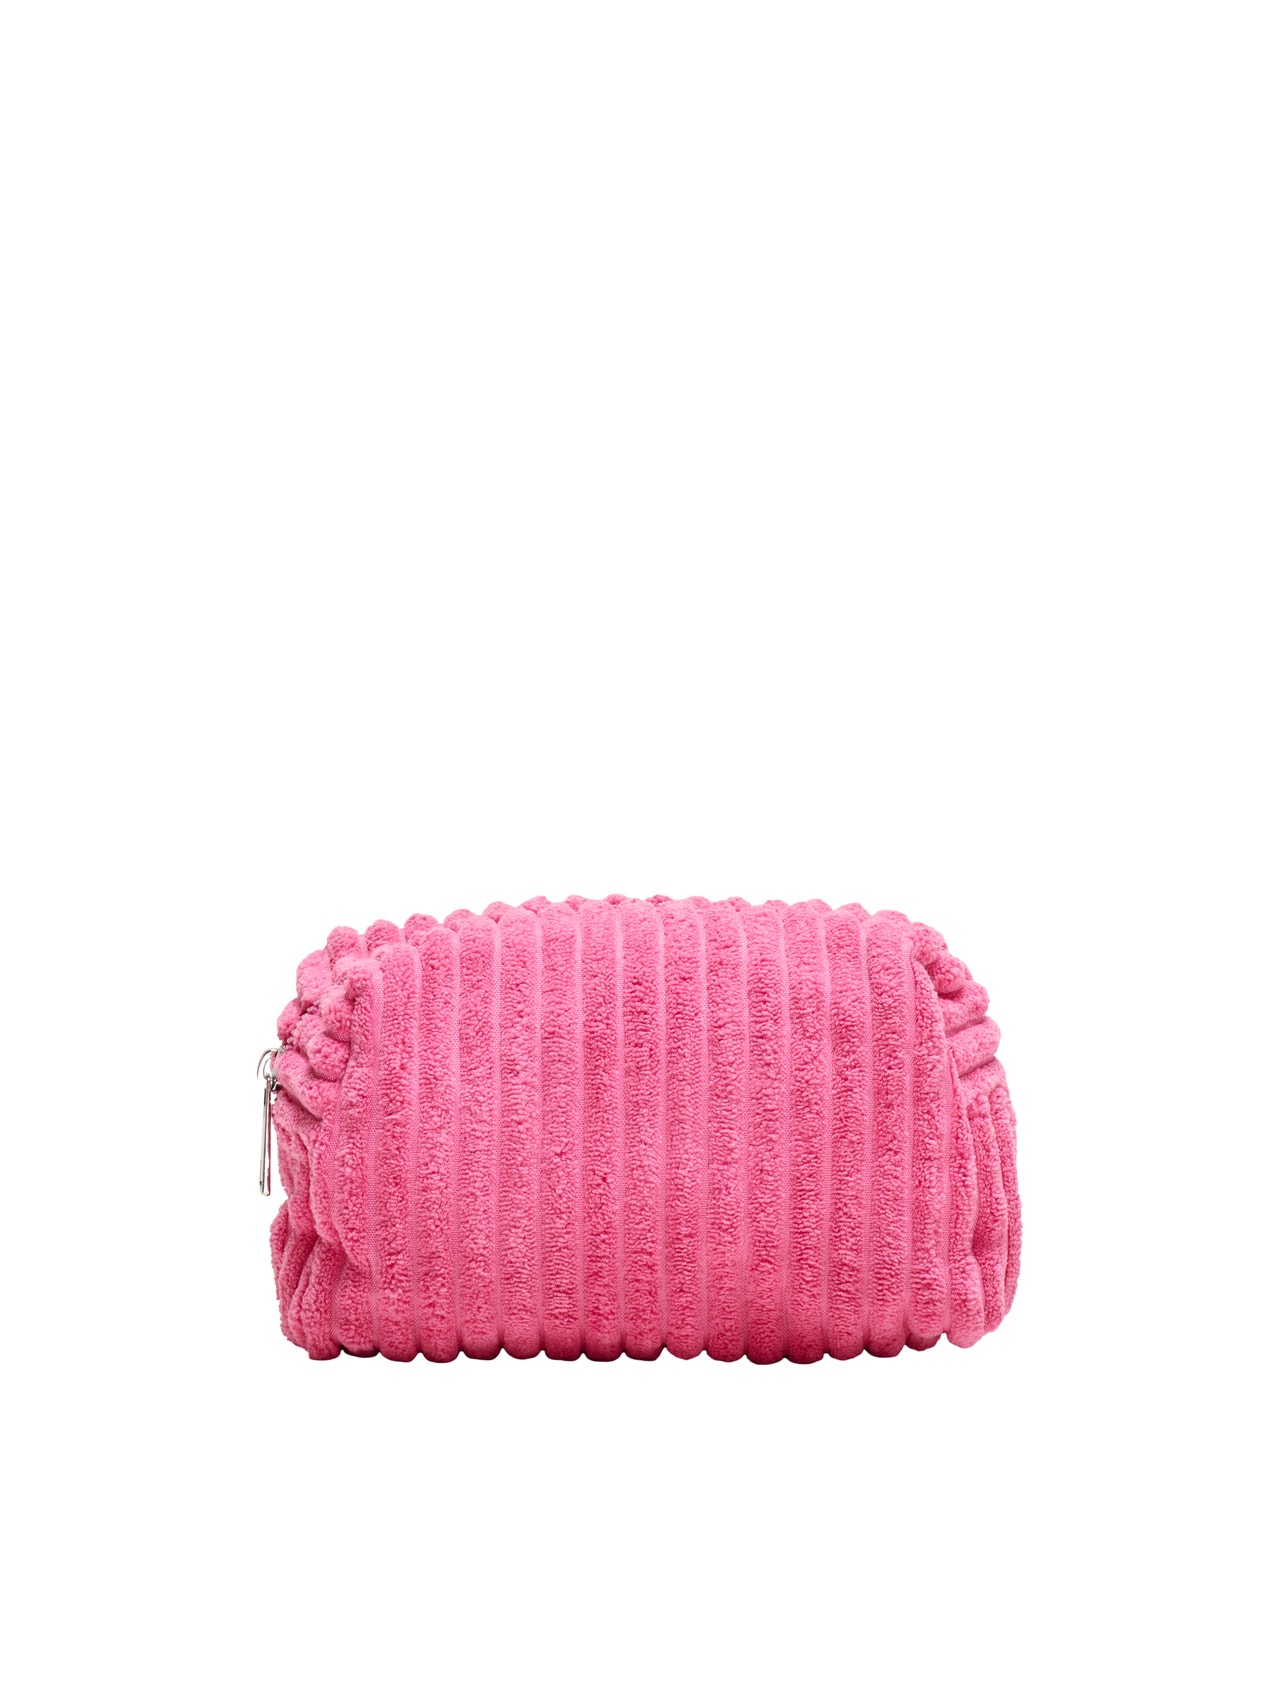 ONLY Clutch -Knockout Pink - 15313252